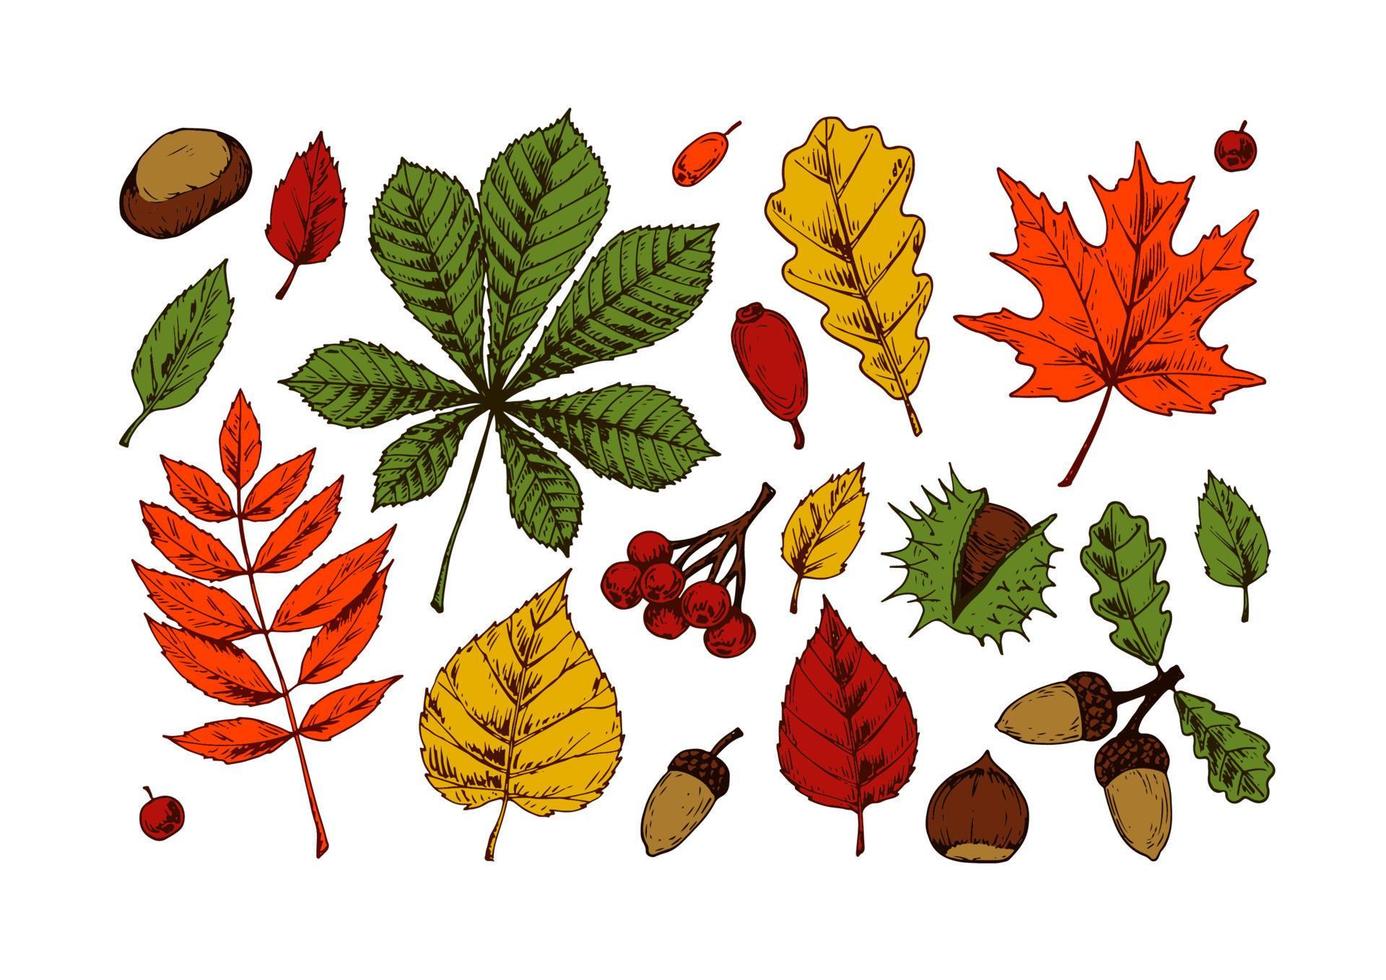 Set of autumn forest design elements including. Hand drawn autumn clipart with leaves, acorns, berries, chestnuts. Vector illustration isolated on white. Colored sketch